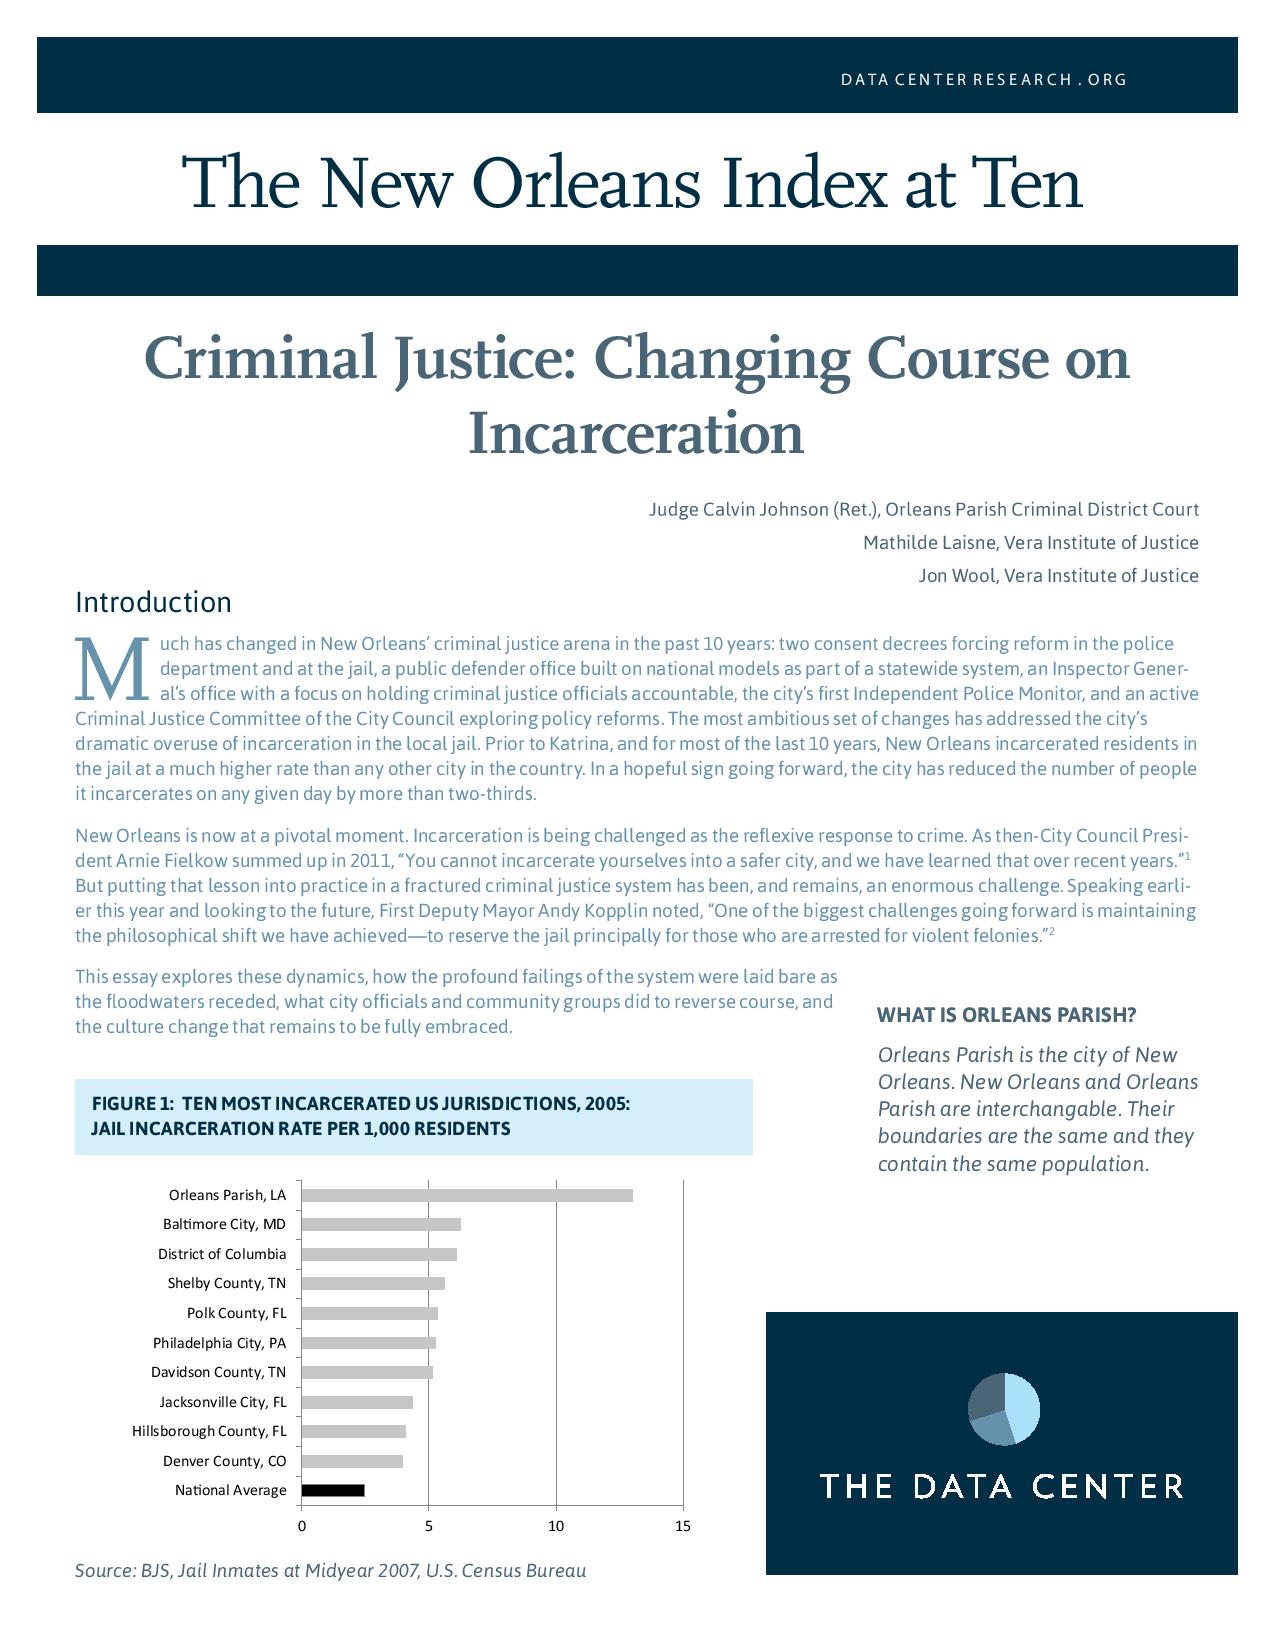 Criminal Justice: Changing Course on  Incarceration